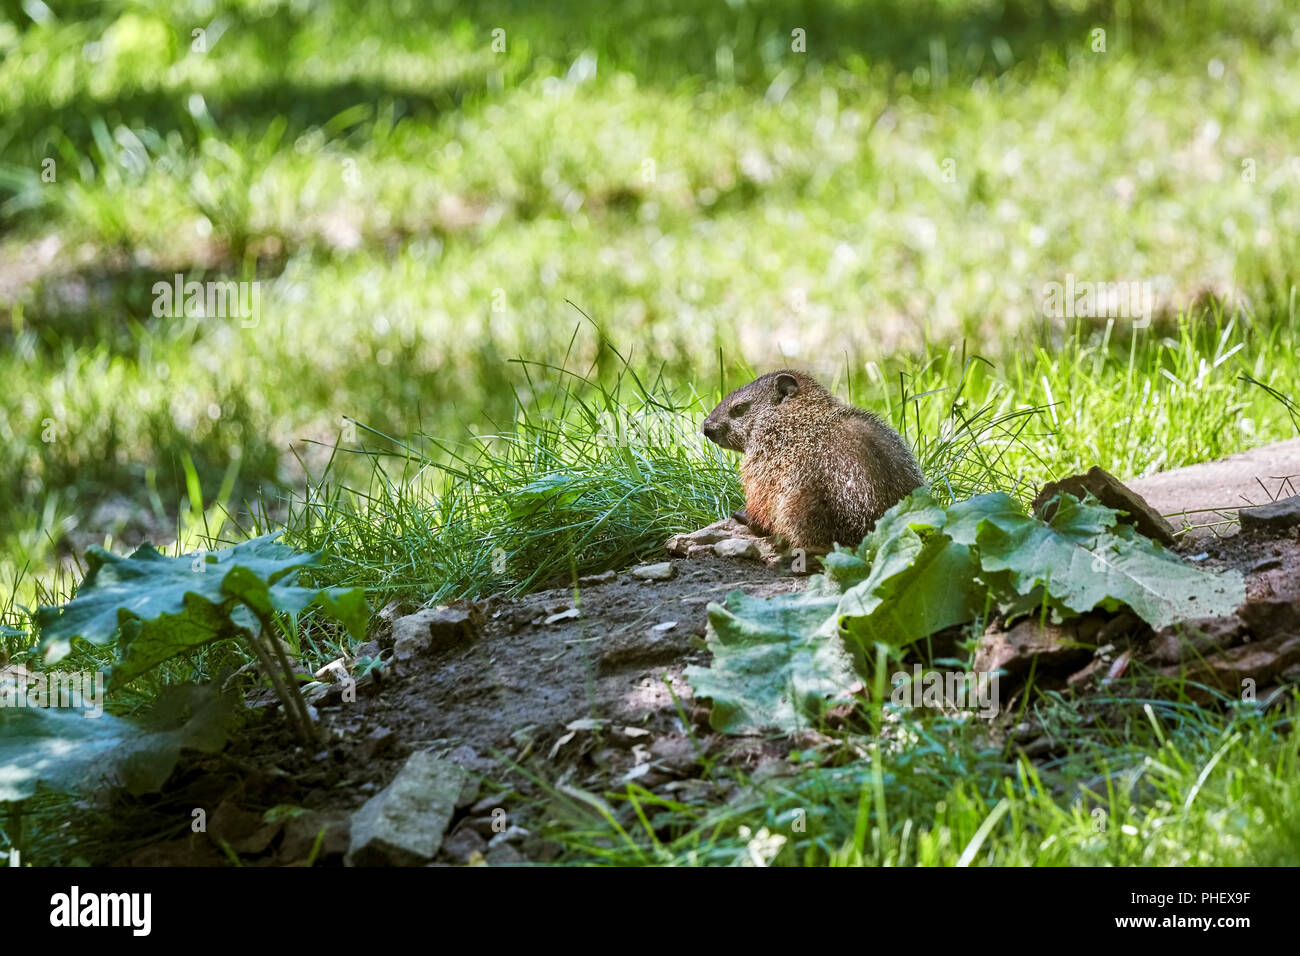 Little meadow vole (Microtus pennsylvanicus) standing on a wooden log on a green grass field Stock Photo